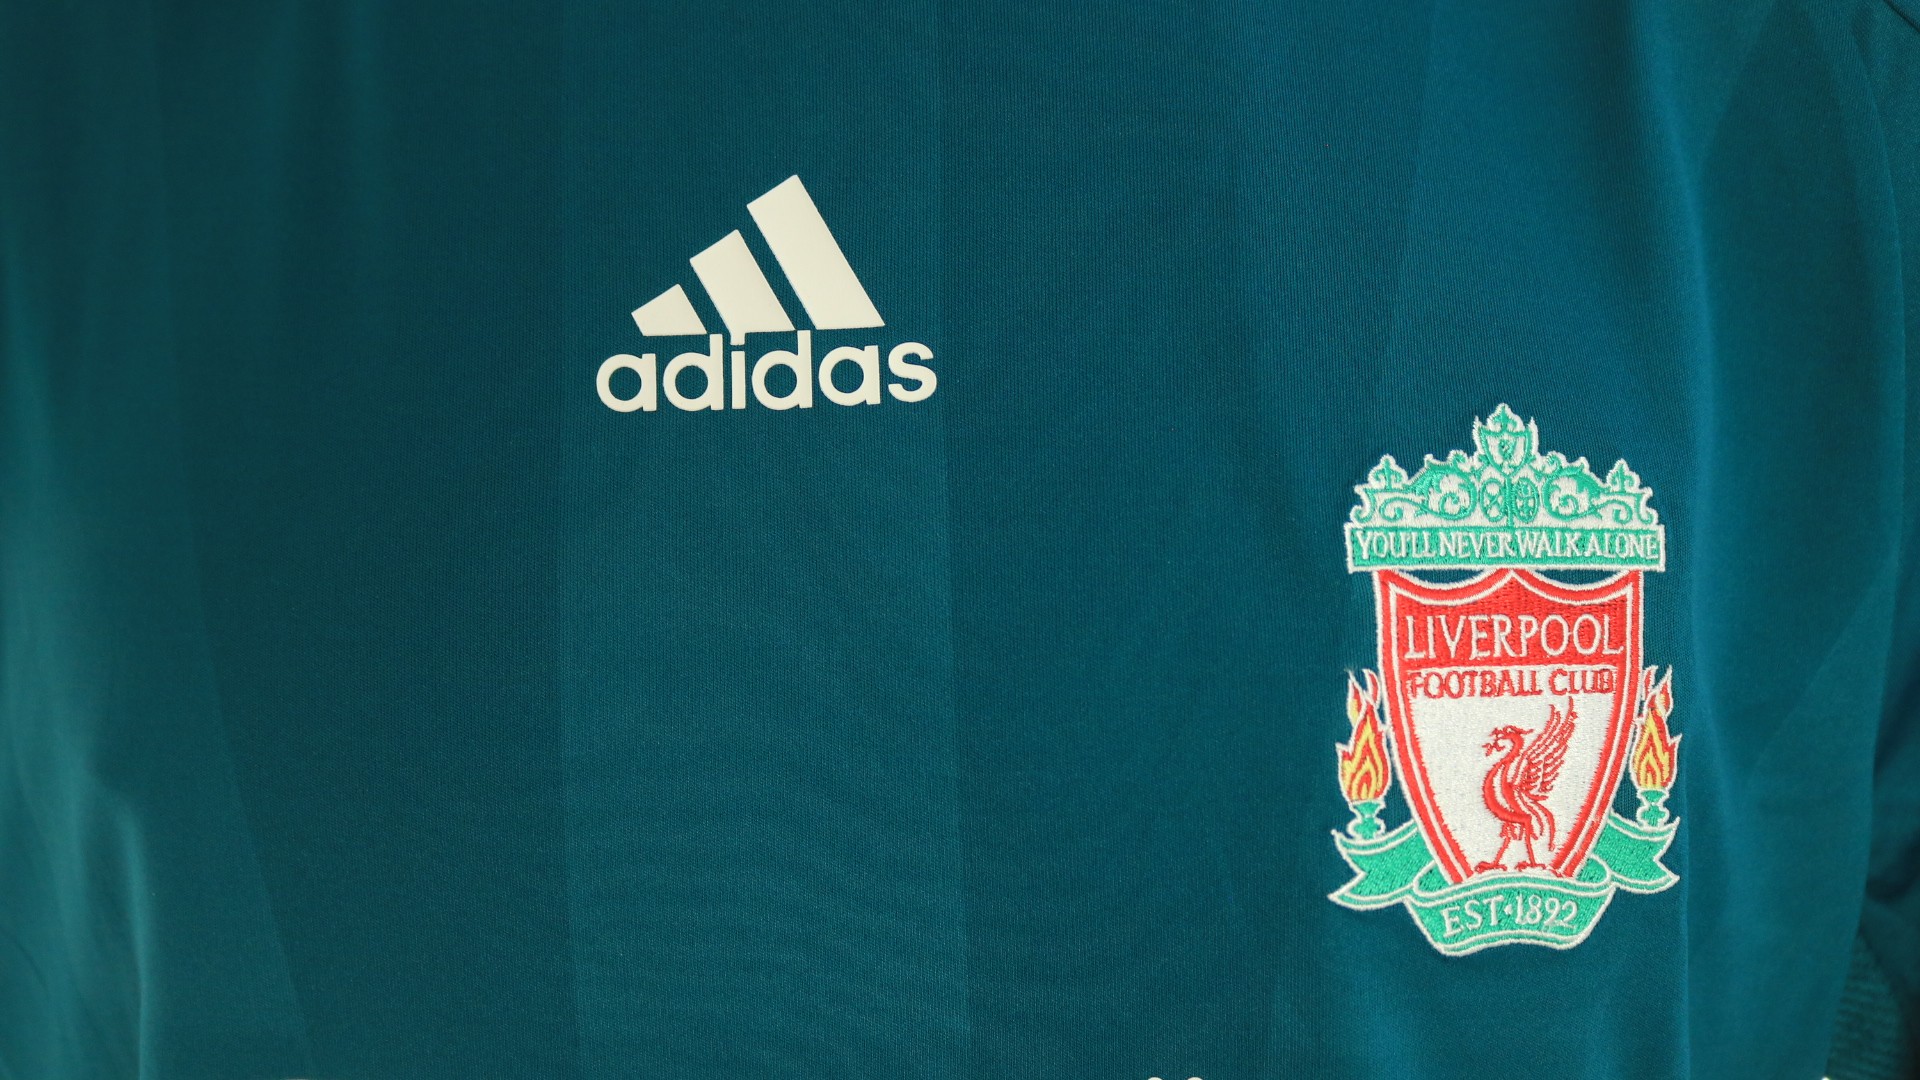 Match issued Torres Liverpool shirt, Premier League 10/11 - CharityStars